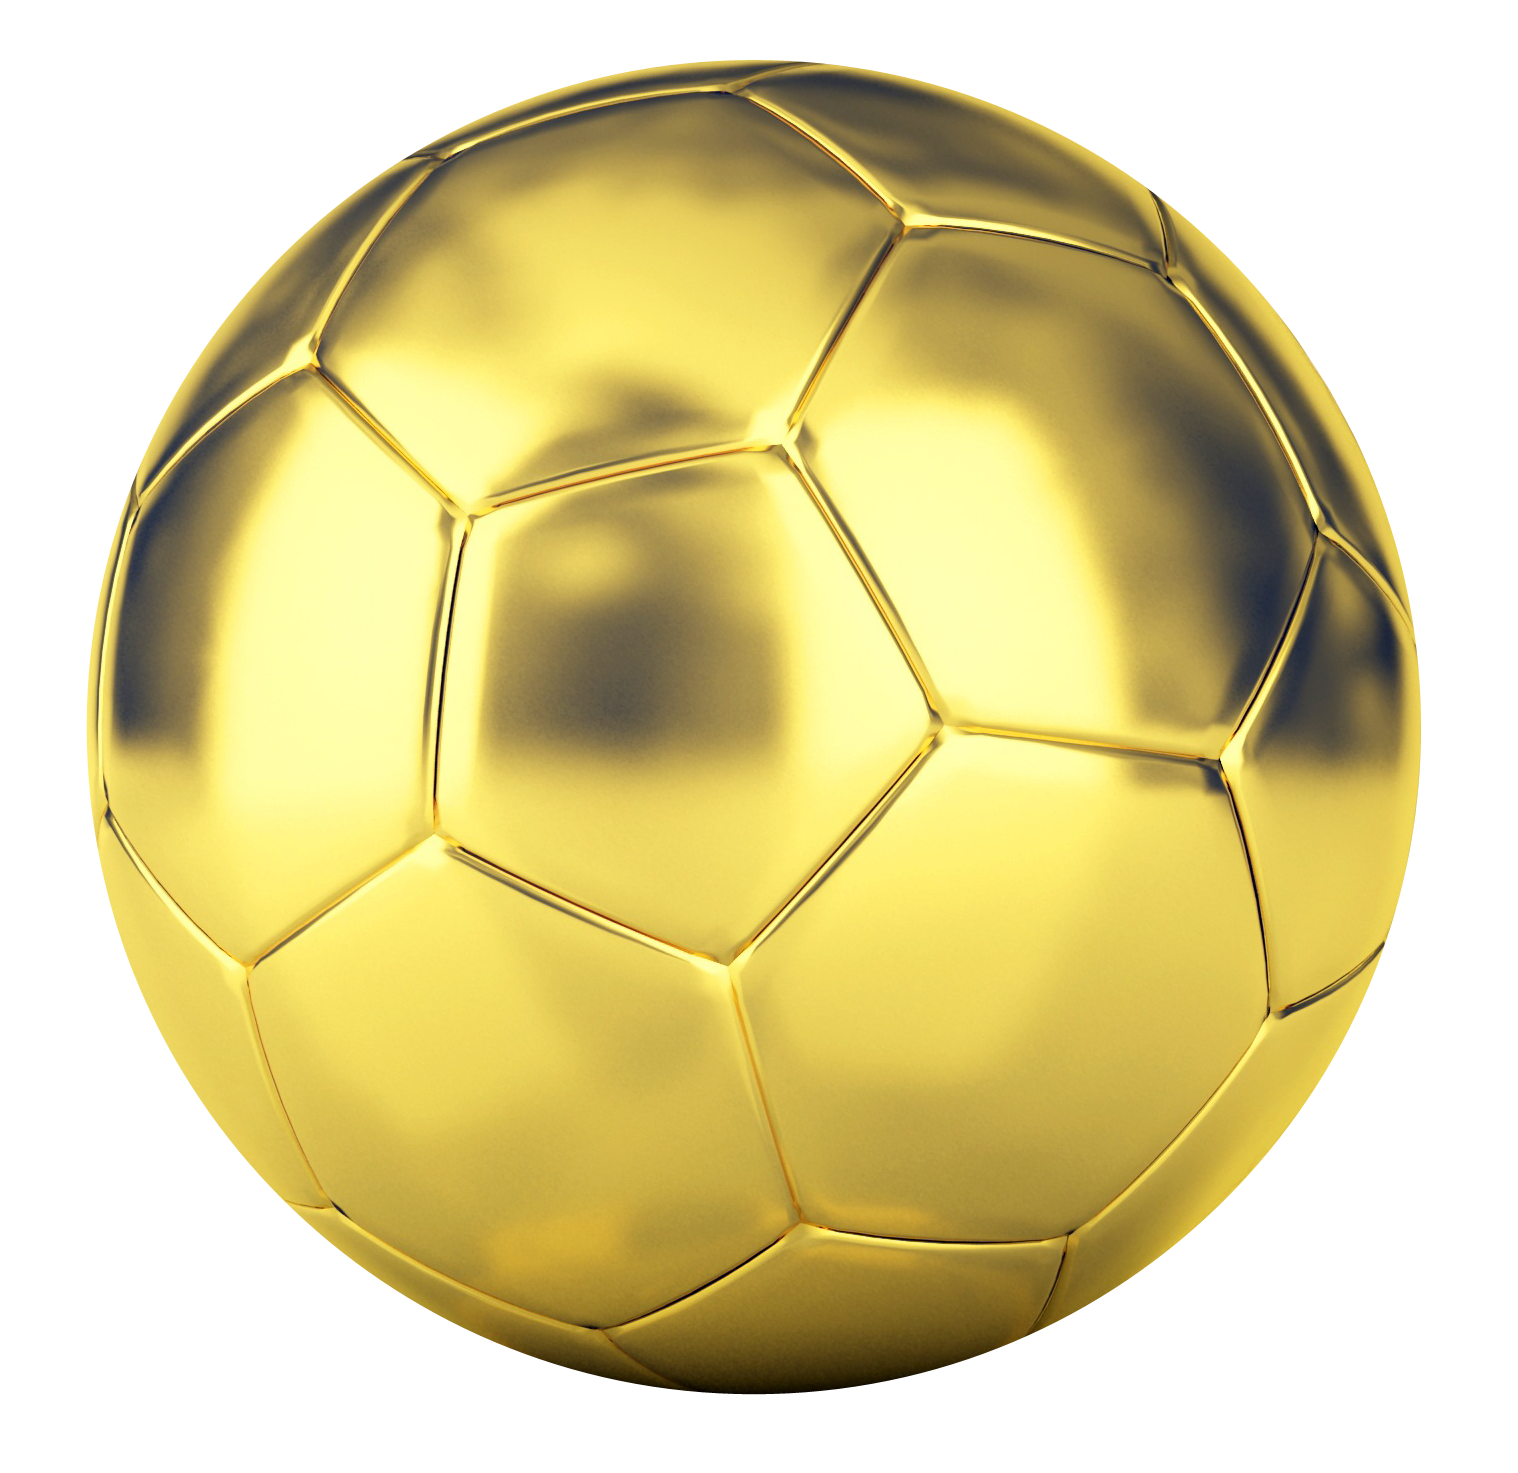 Gold Object PNG Background Image